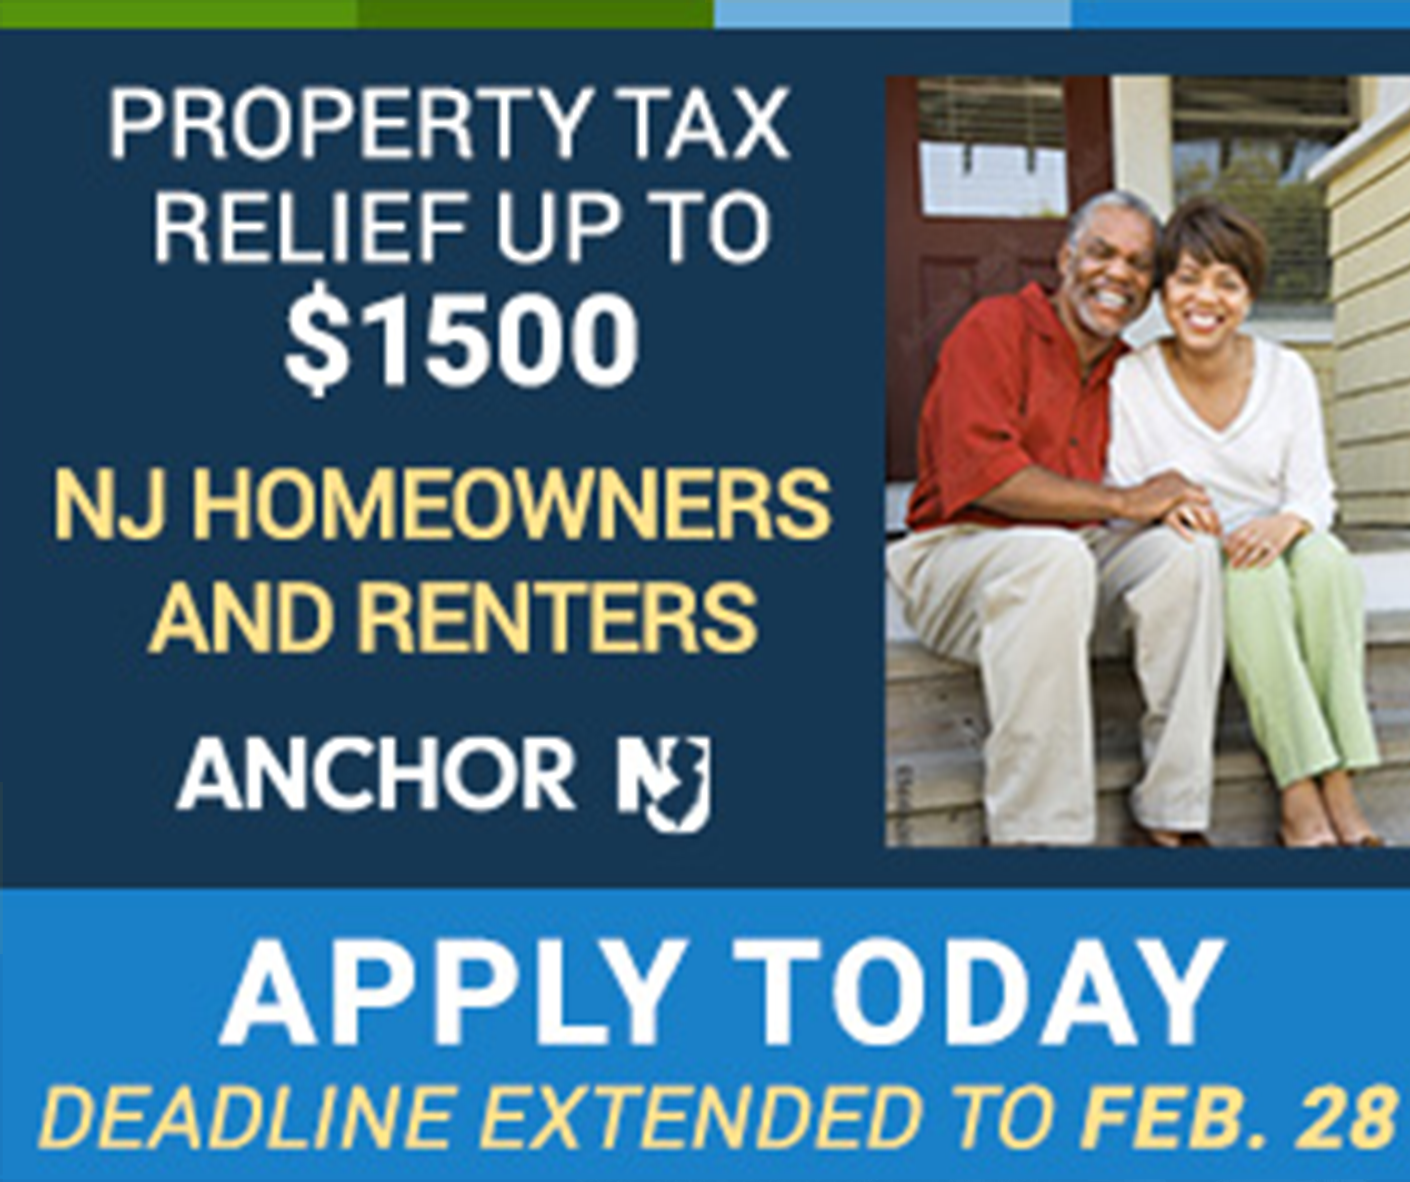 department-of-the-treasury-anchor-affordable-nj-communities-for-homeowners-renters